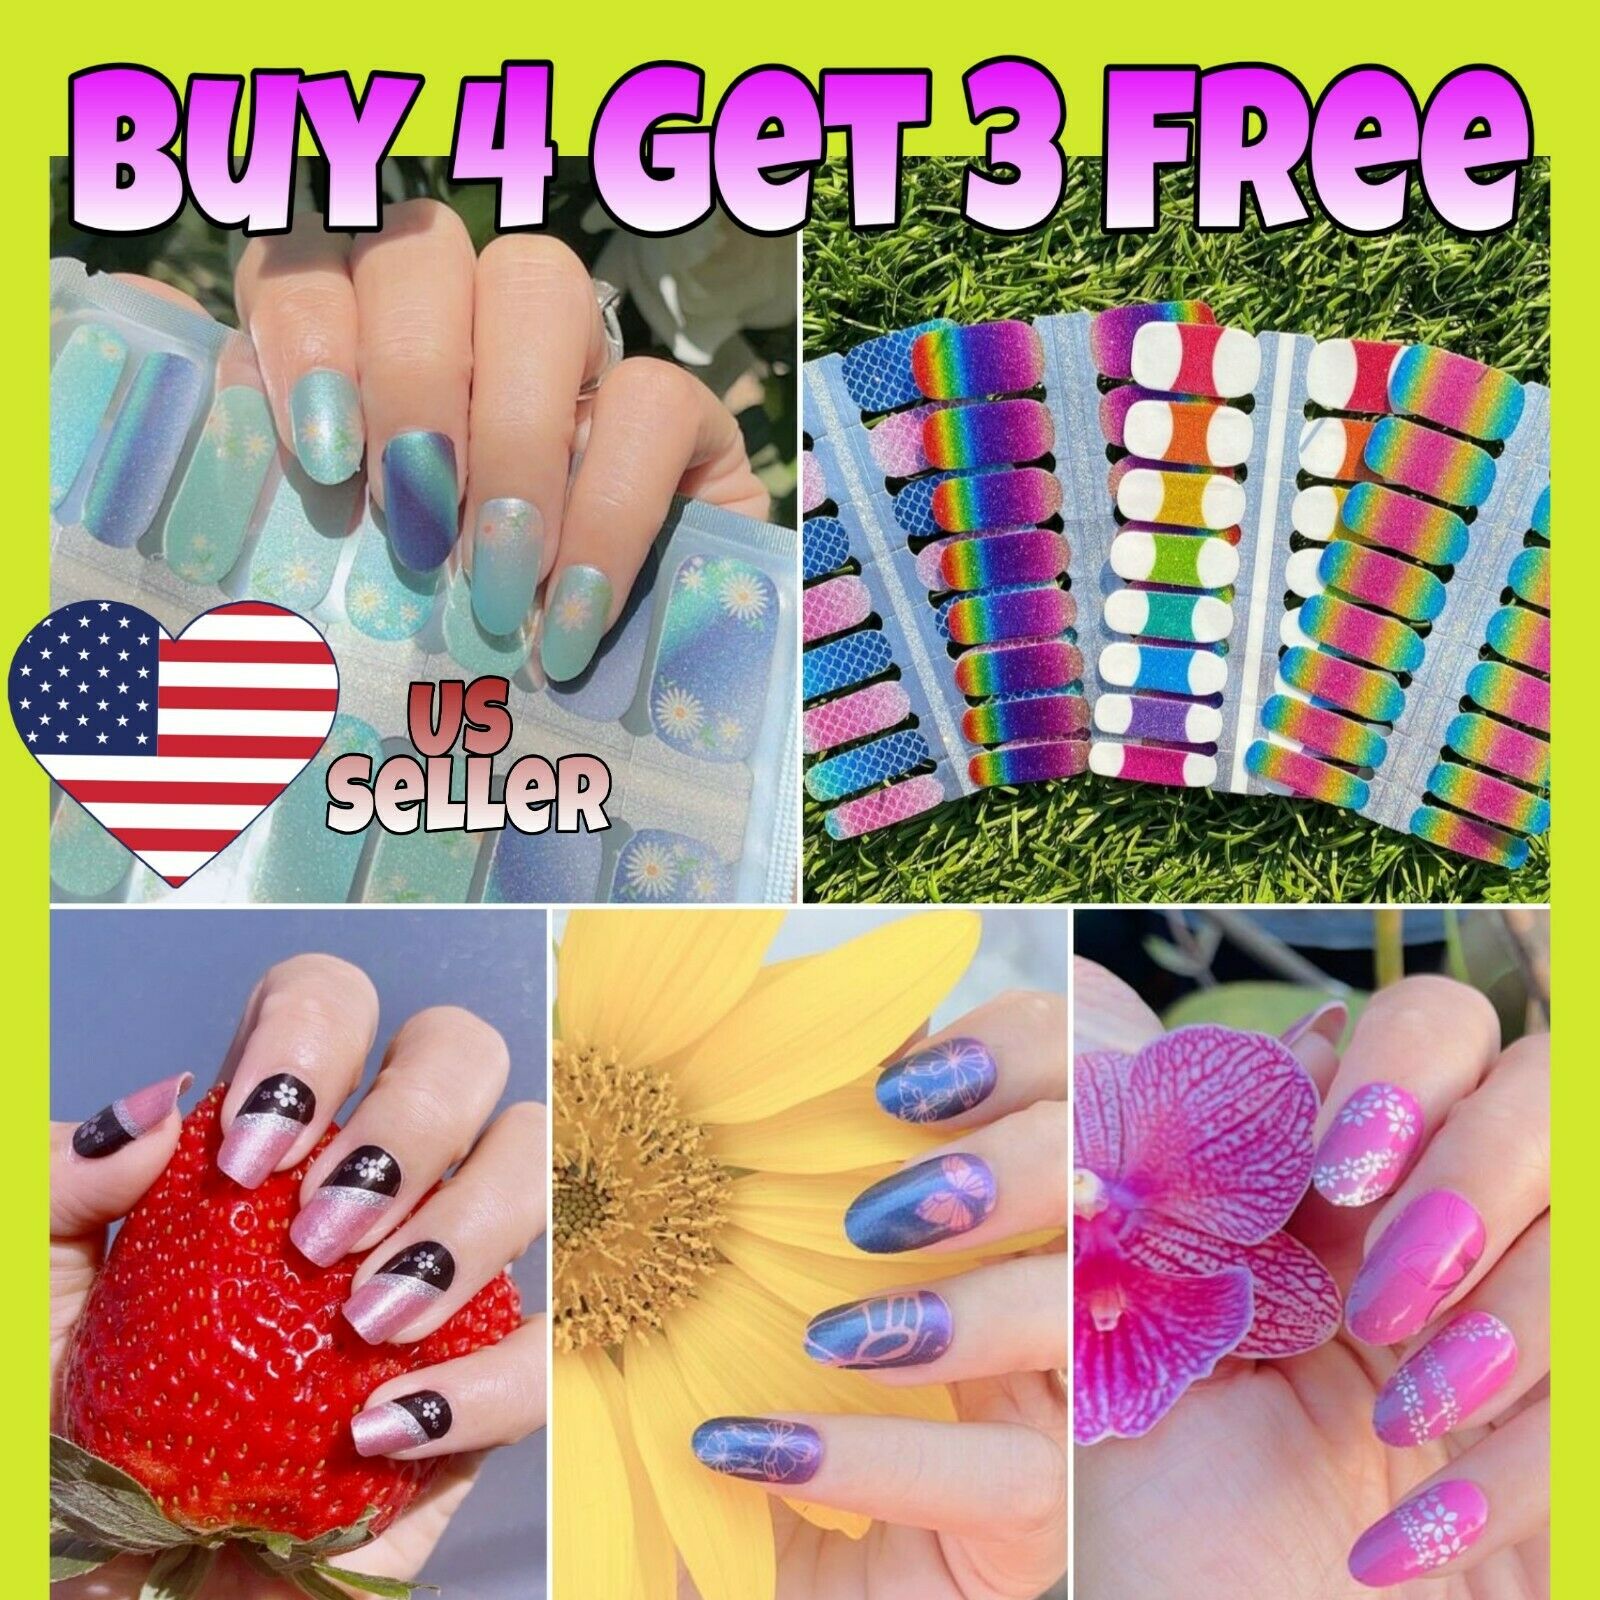 Color Nail Polish Strips Buy 04 Get 03 Free Nail Stickers Wraps Manicure Glitter